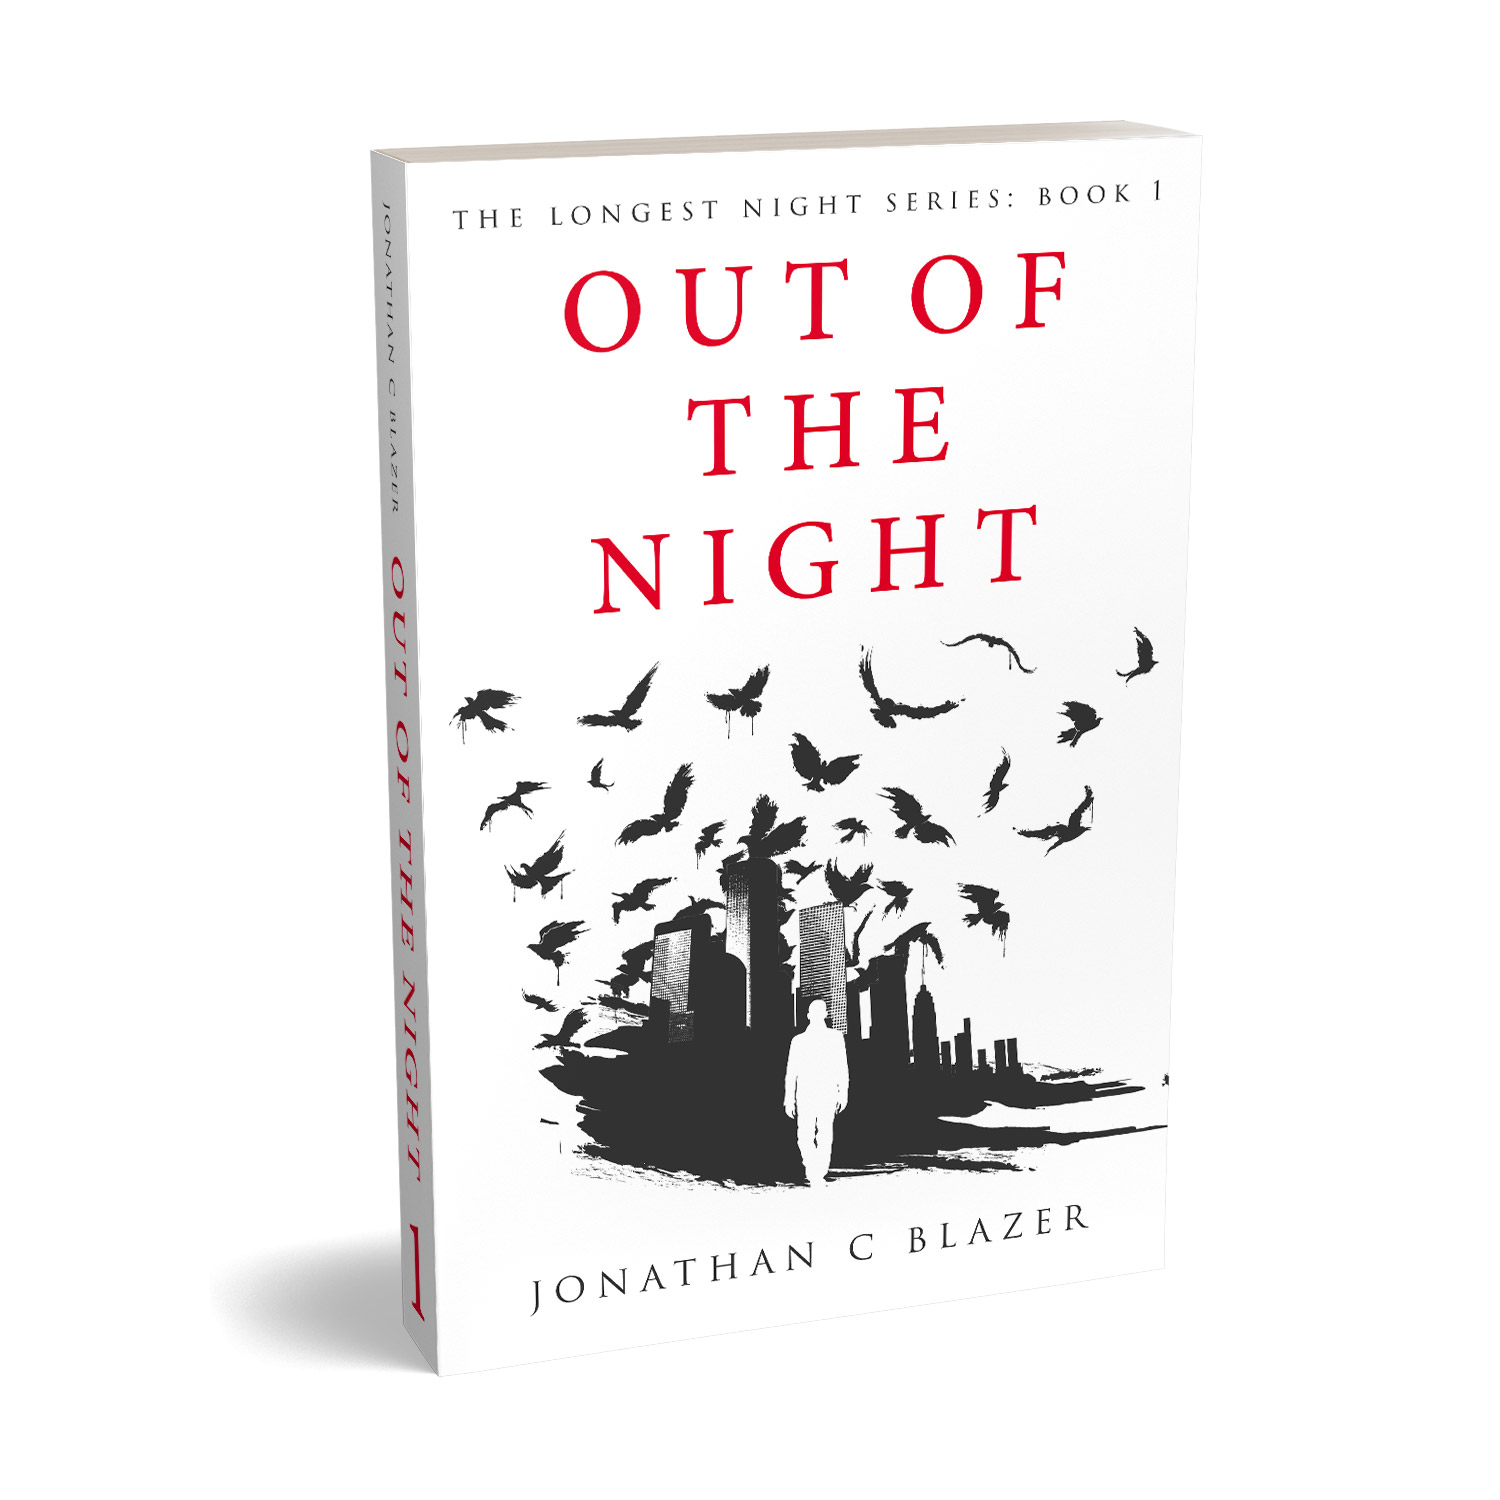 'Out Of The Night' is a highly evocative, wistful ghost story. The author is Jonathan C Blazer. The book cover was designed by Mark Thomas, of coverness.com. To find out more about my book design services, please visit www.coverness.com.